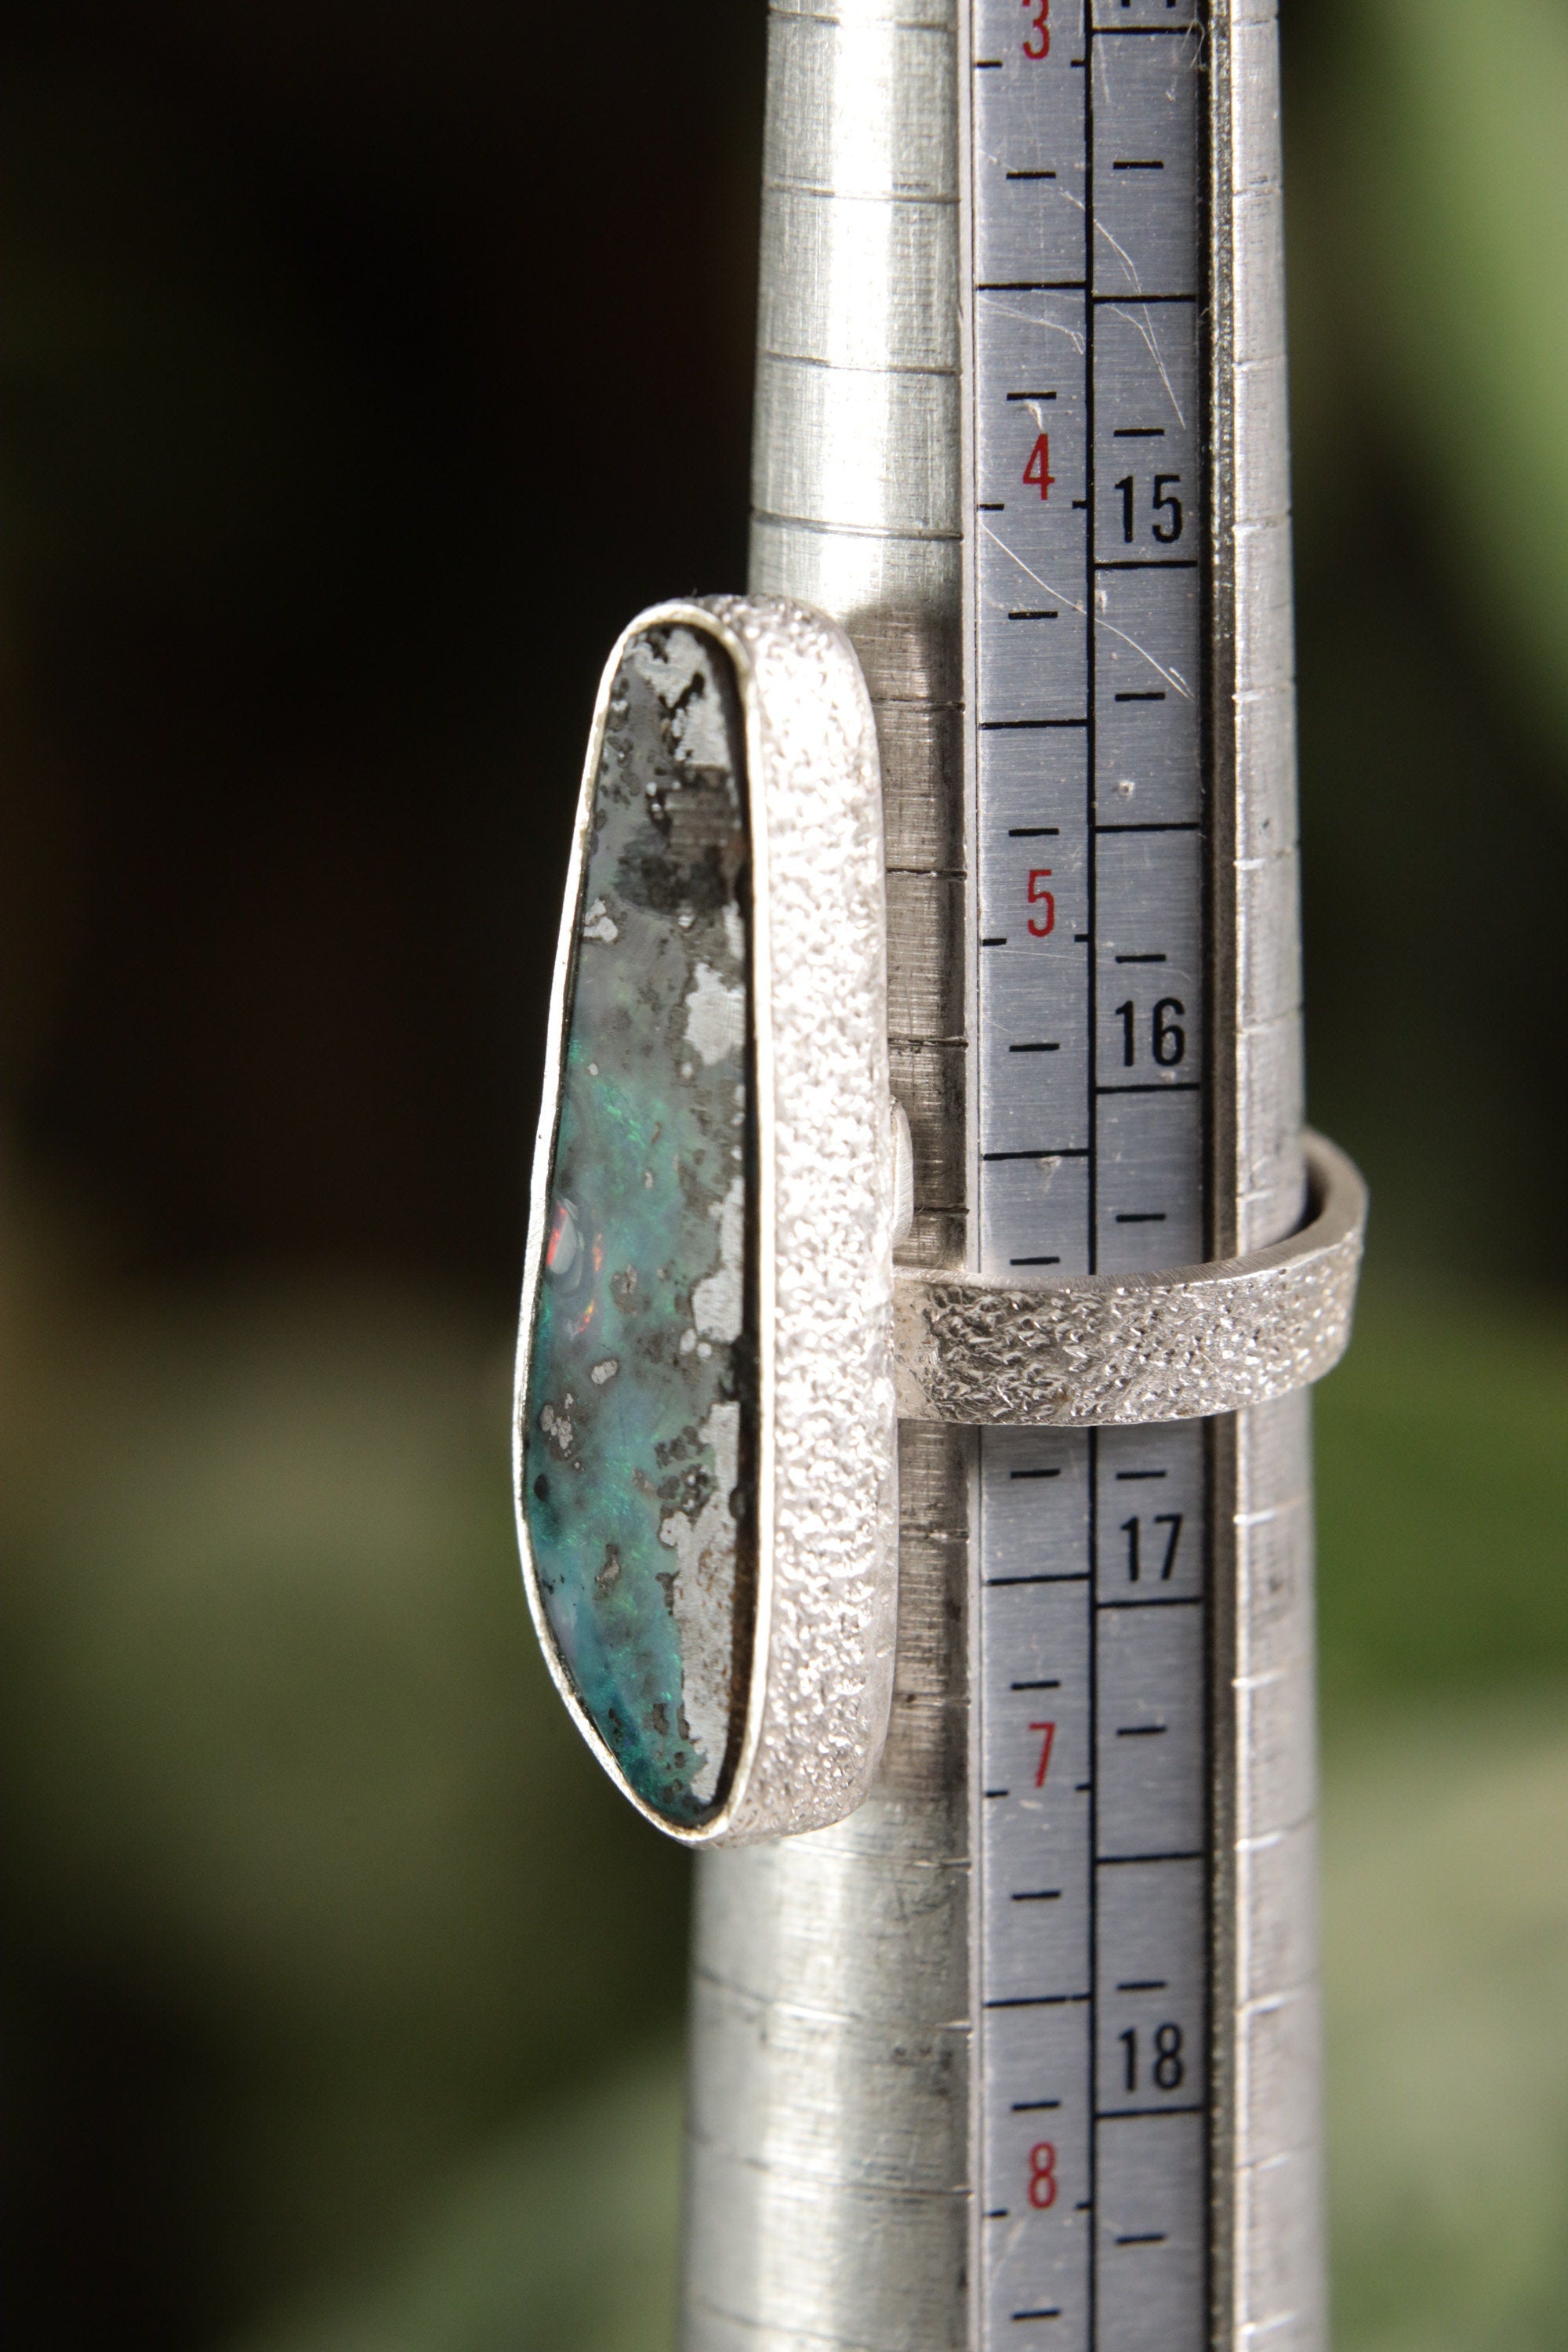 Ethereal Light Opal: Adjustable Sterling Silver Ring with Opal - Textured - Unisex - Size 5-12 US